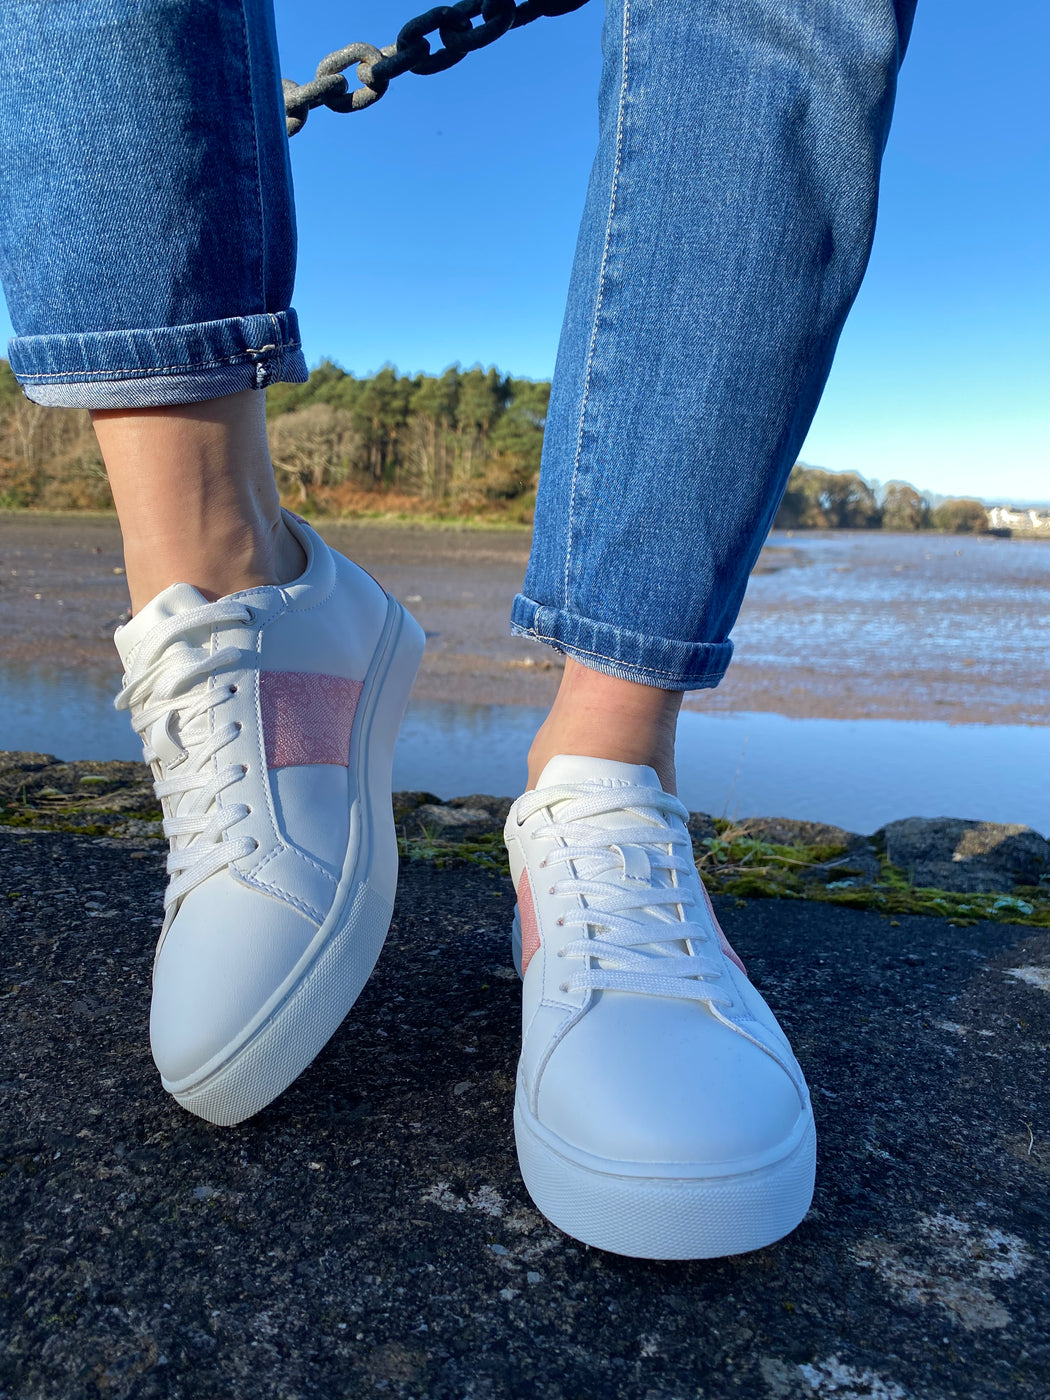 FL7TODELE12 Guess white pink trainers